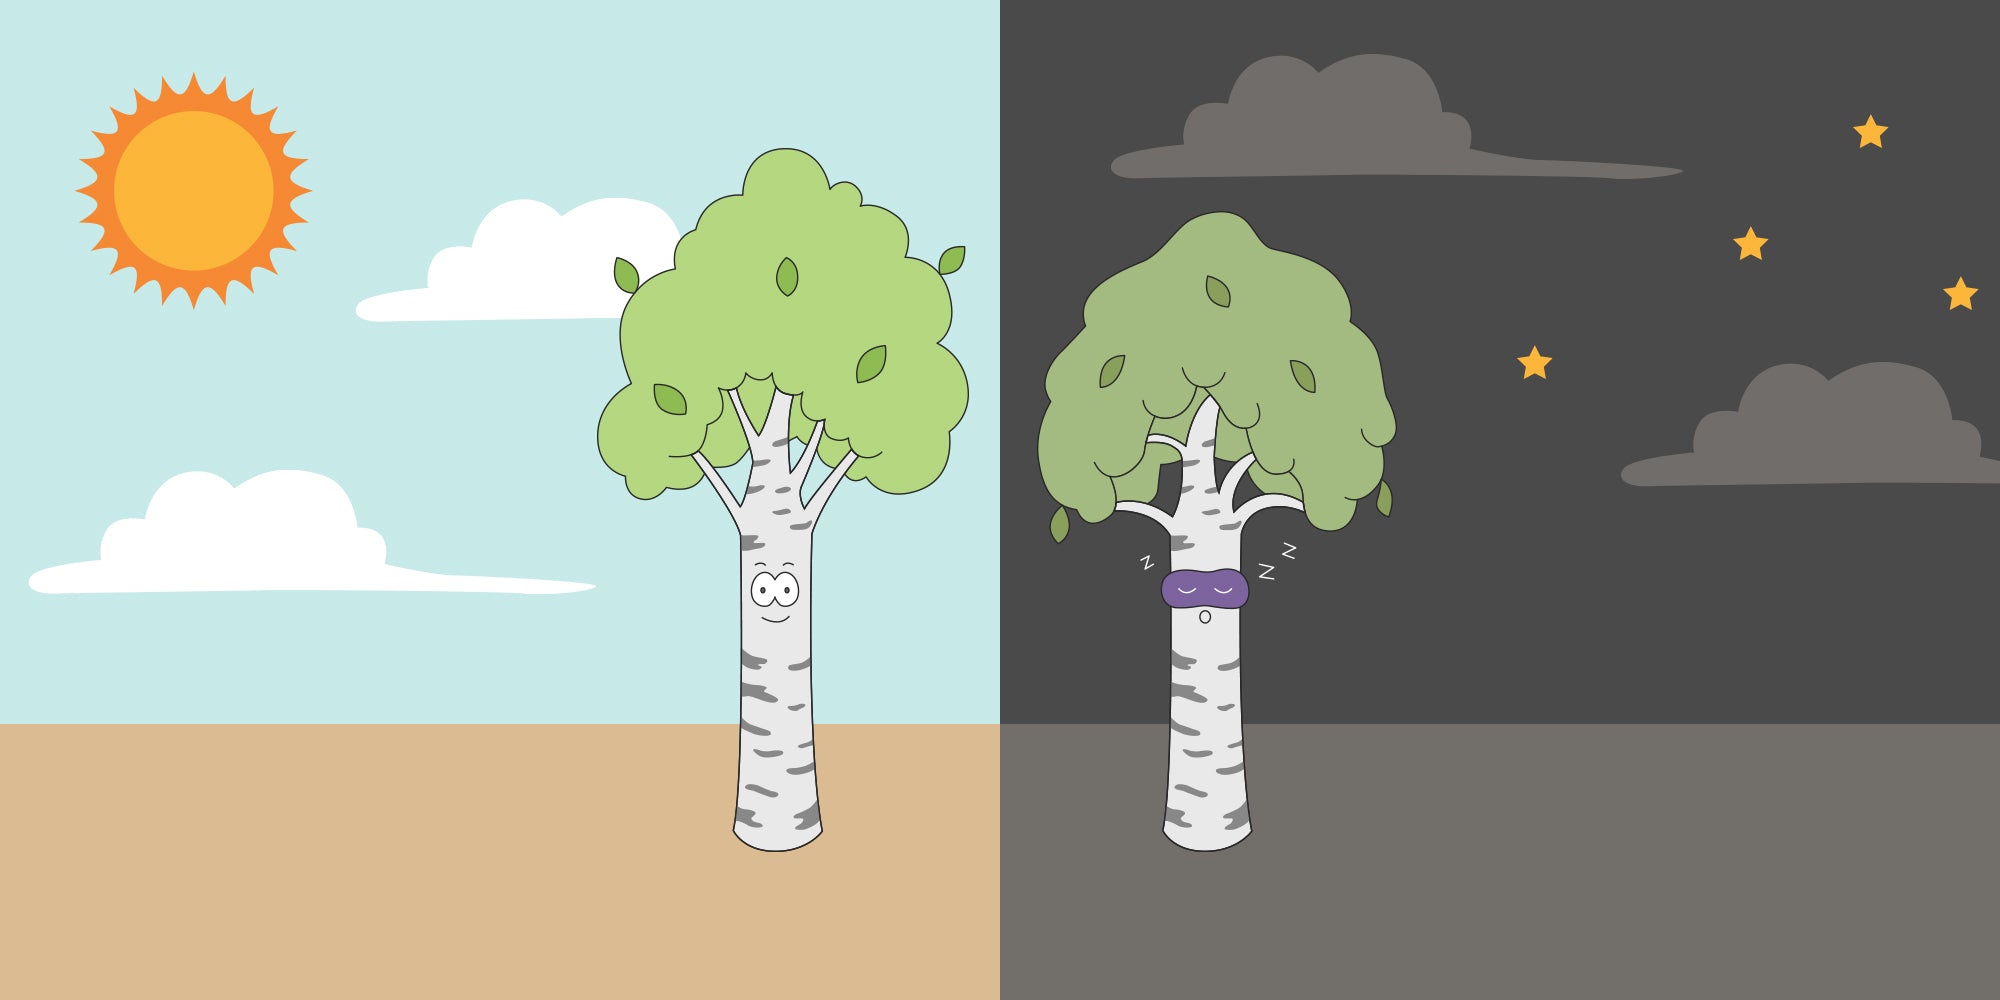 Illustration of trees at night and during the day